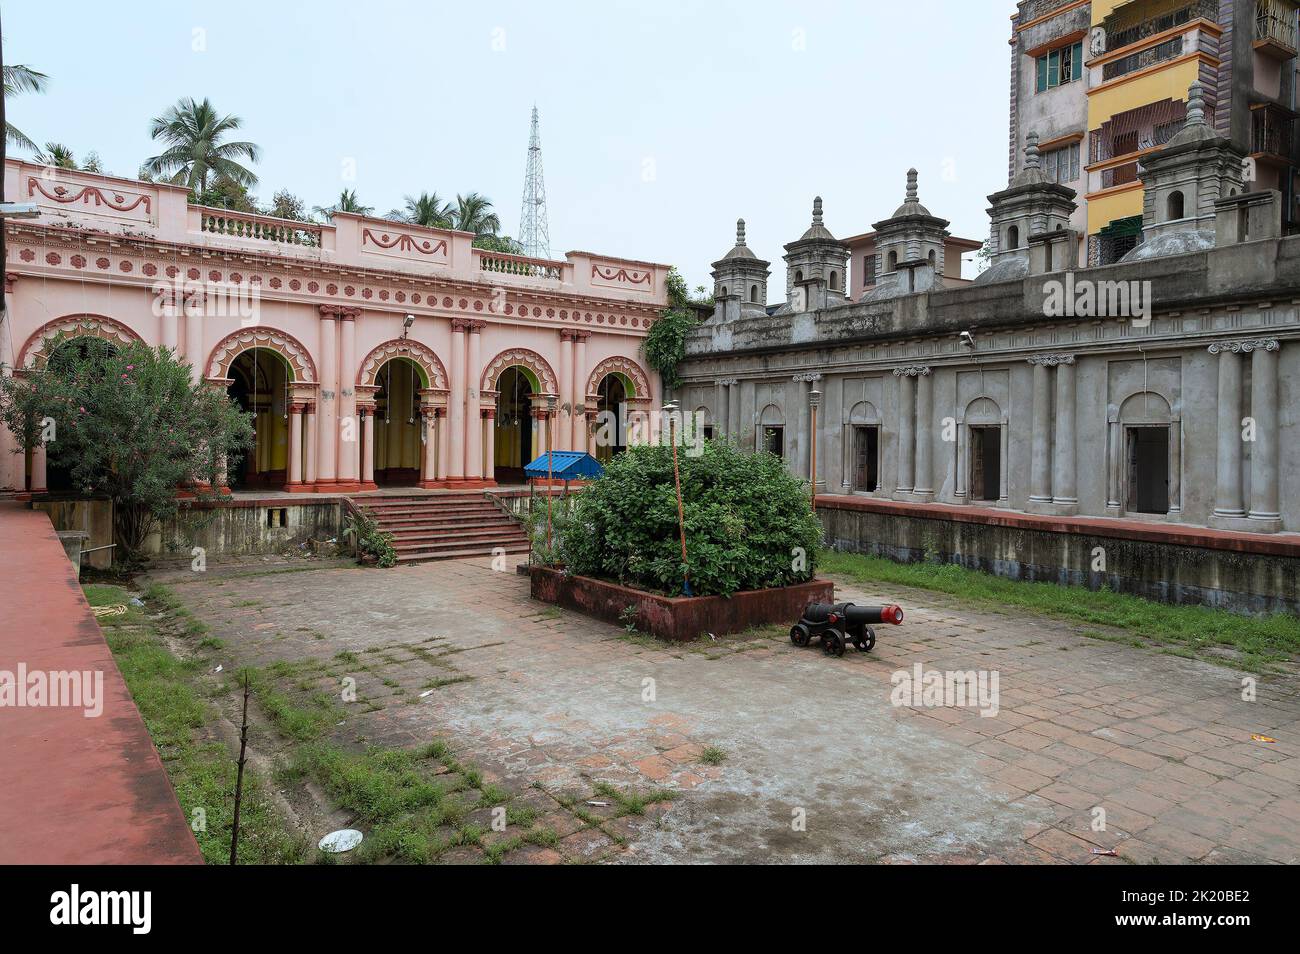 Howrah, West Bengal, India - 26th October 2020 : View of Shib Mandir, temple for worshipping lord Shiva , of Andul Rajbarhi , a palace or rajbari. Stock Photo